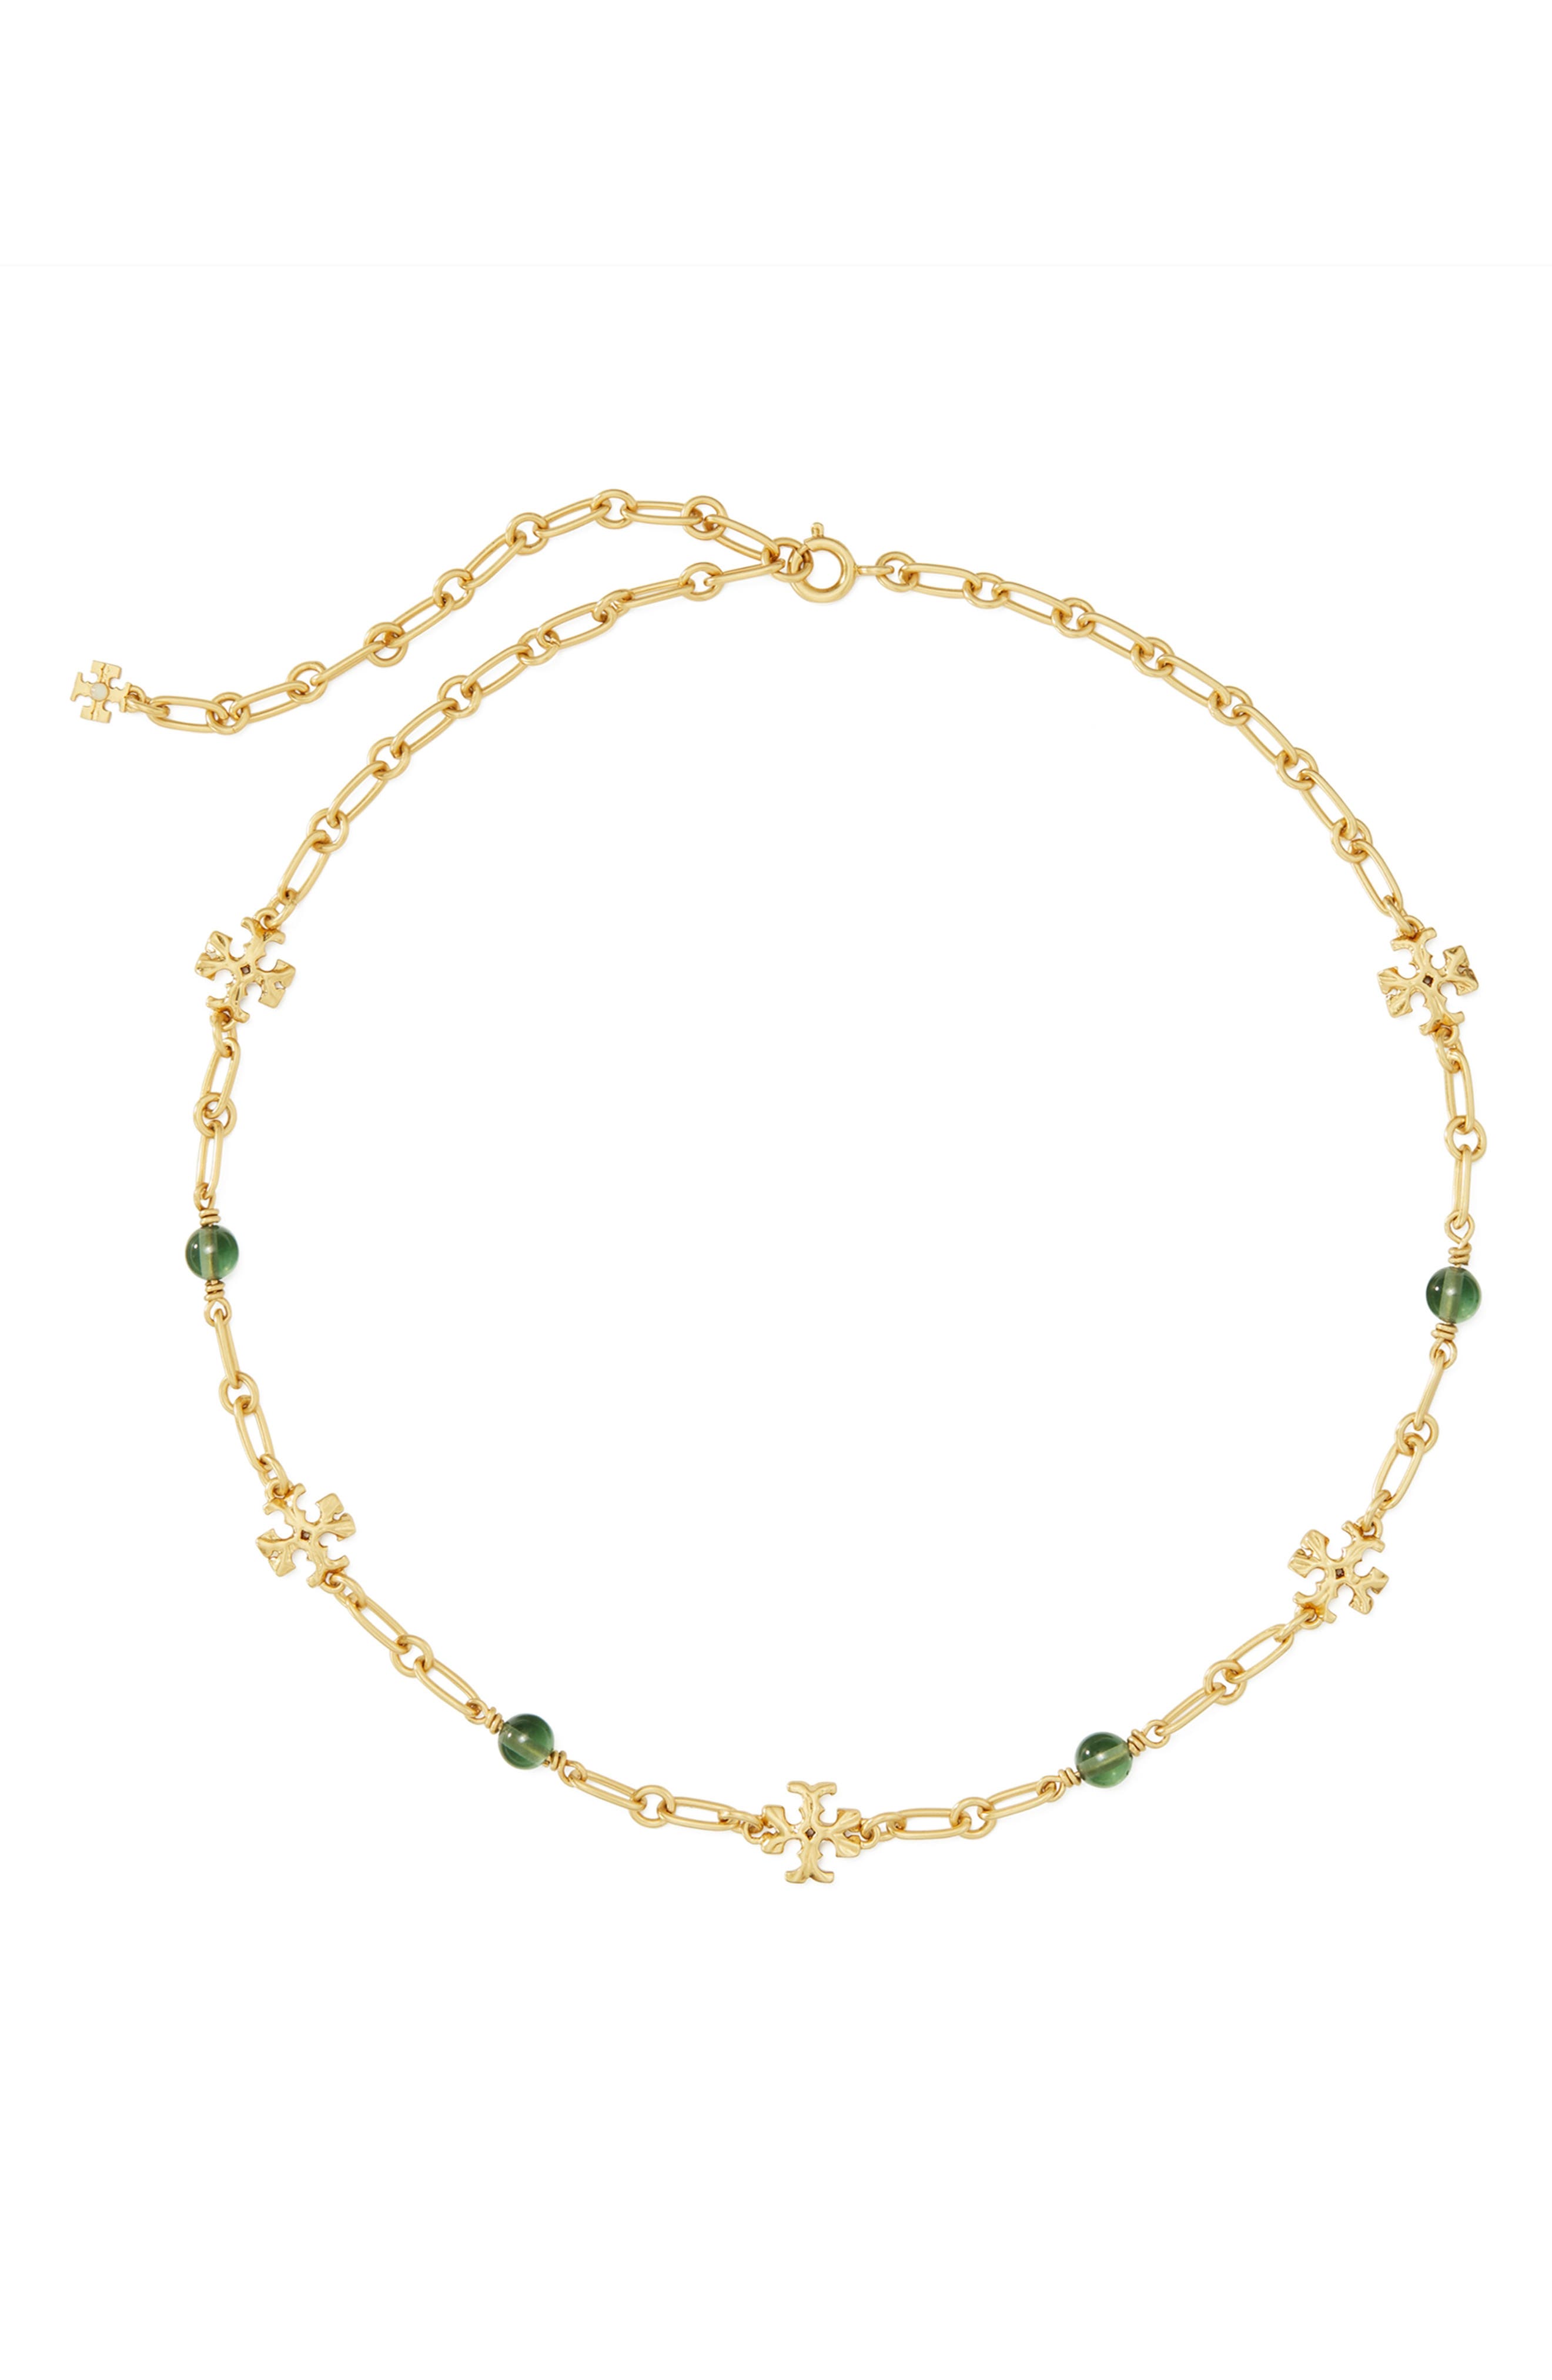 Tory Burch Roxanne Delicate Station Necklace in Rolled Tory Gold /Green